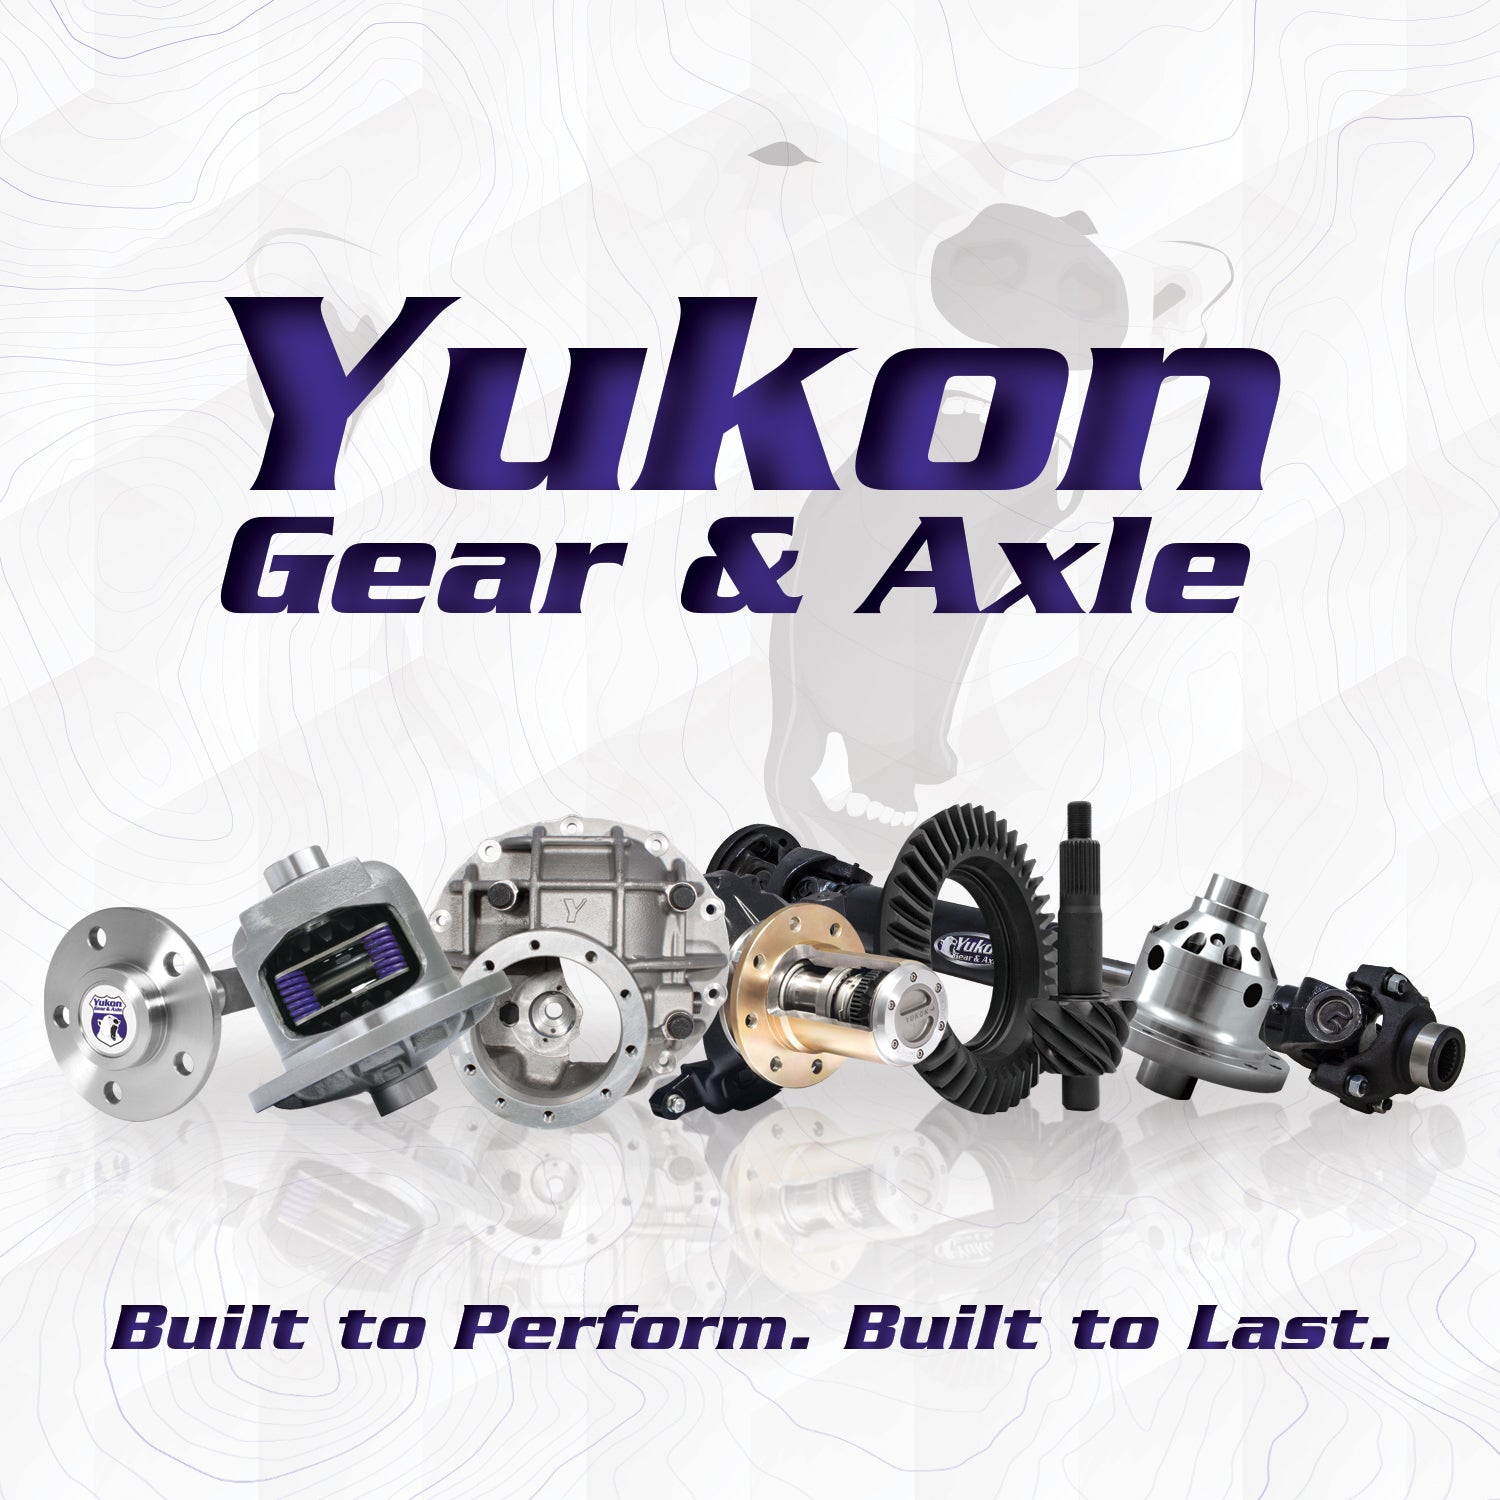 Yukon Gear Dodge Jeep (4WD) 4WD Actuator Housing Cover Gasket - Front YCGD30-DISCO